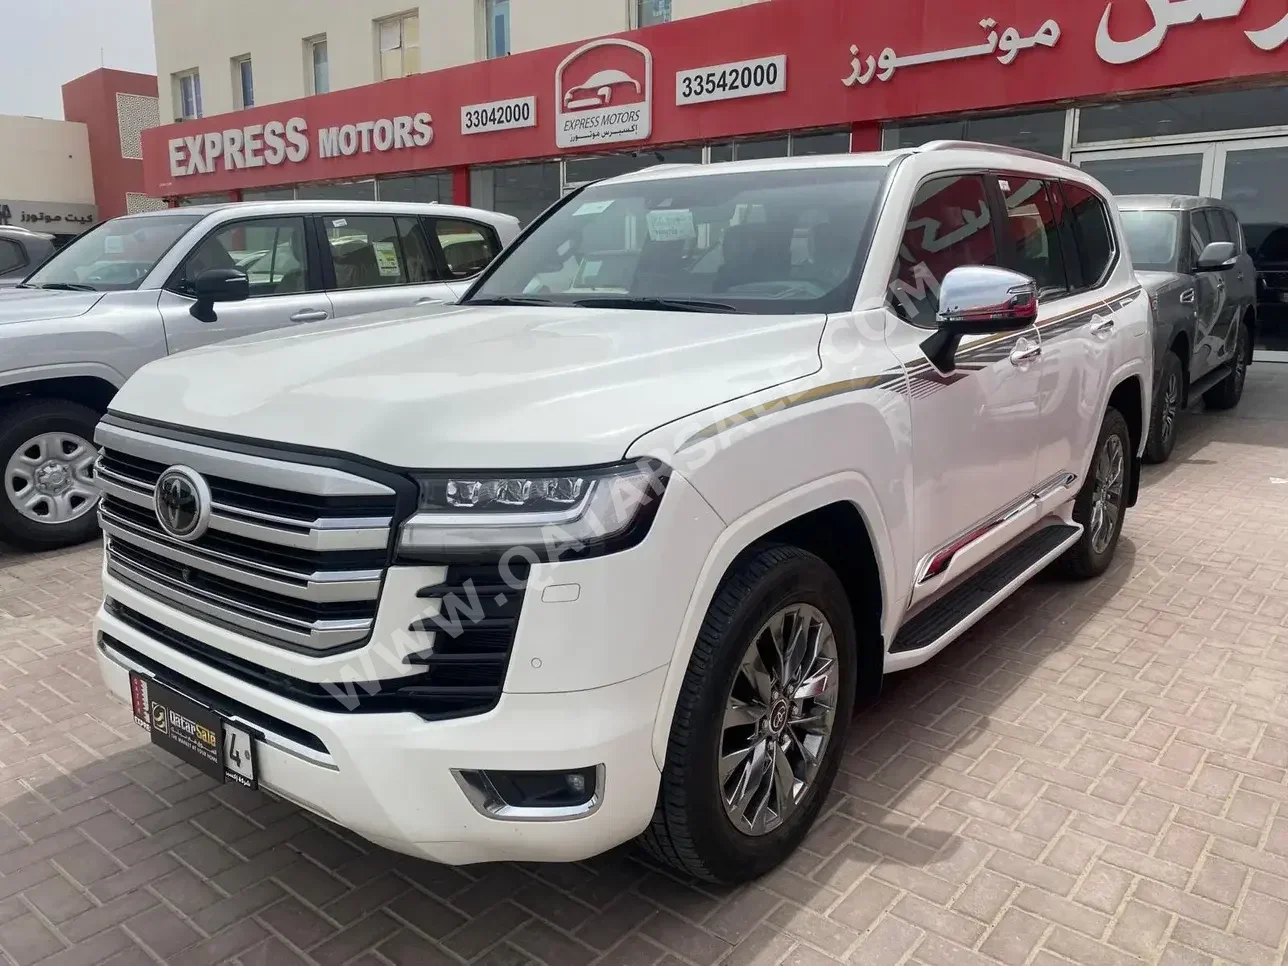 Toyota  Land Cruiser  VXR Twin Turbo  2022  Automatic  89,000 Km  6 Cylinder  Four Wheel Drive (4WD)  SUV  White  With Warranty